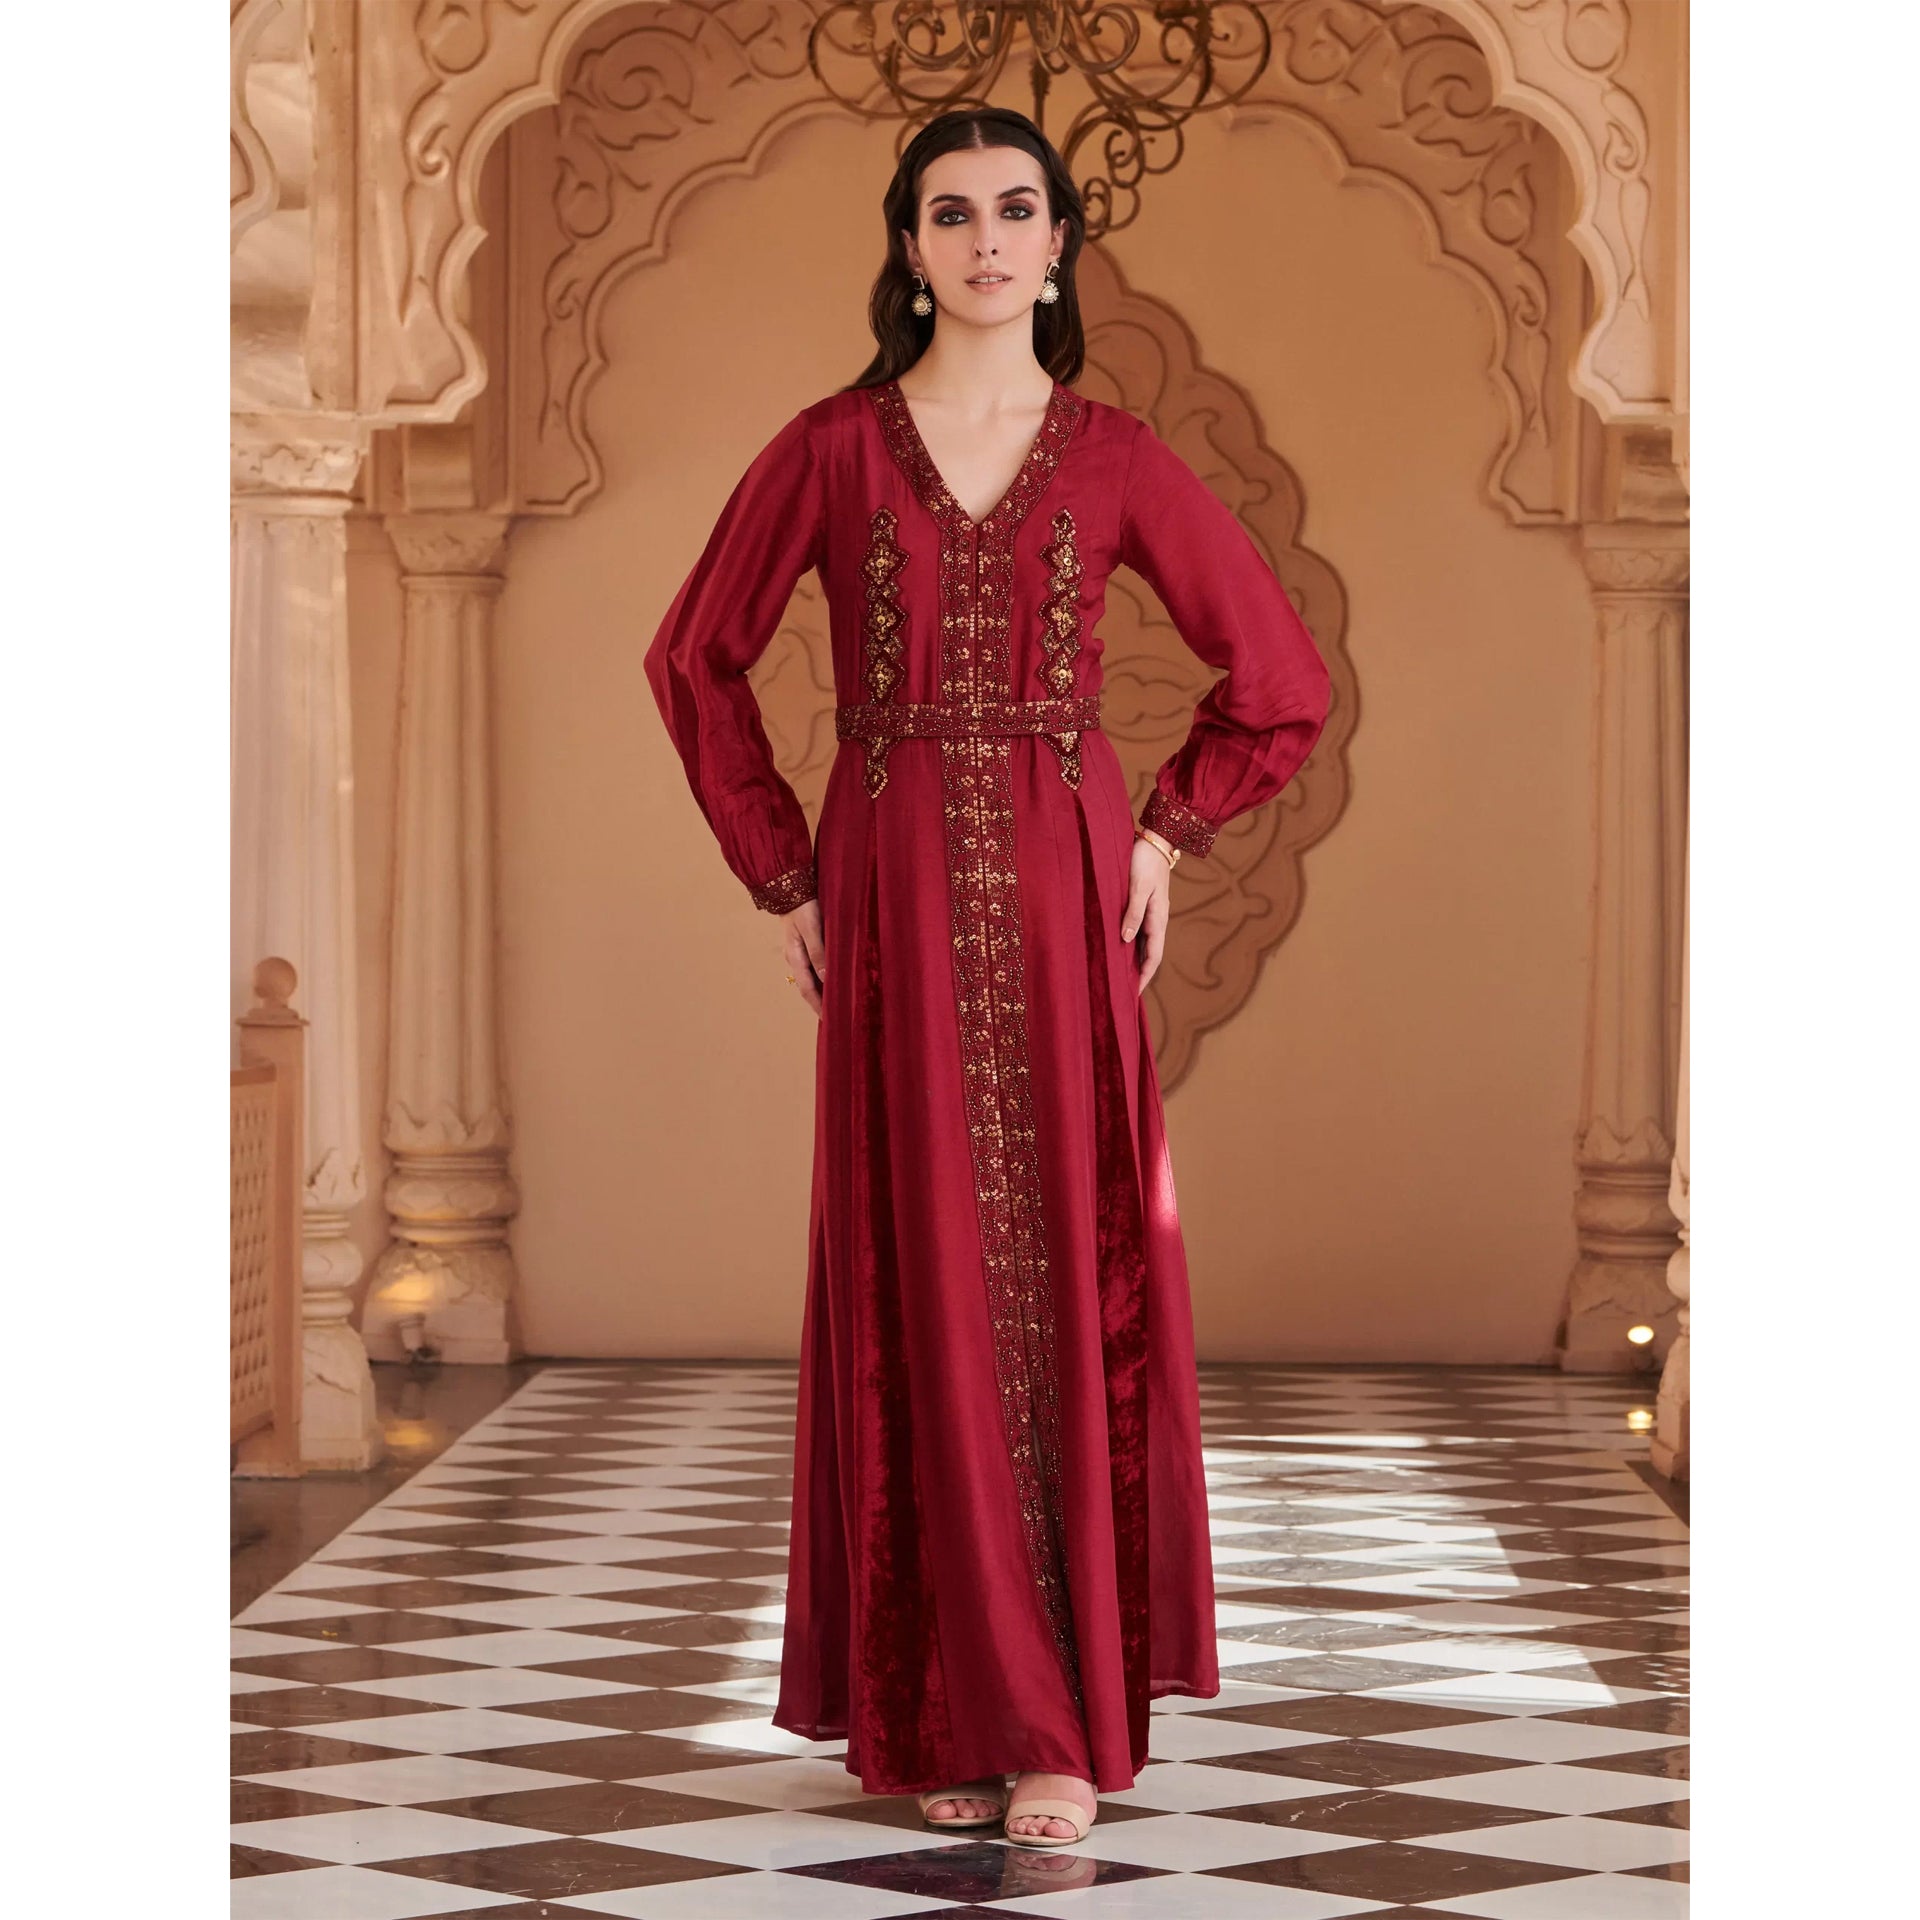 Burgundy Carmit Dress with Long Sleeves and Gold Embroidery From Shalky